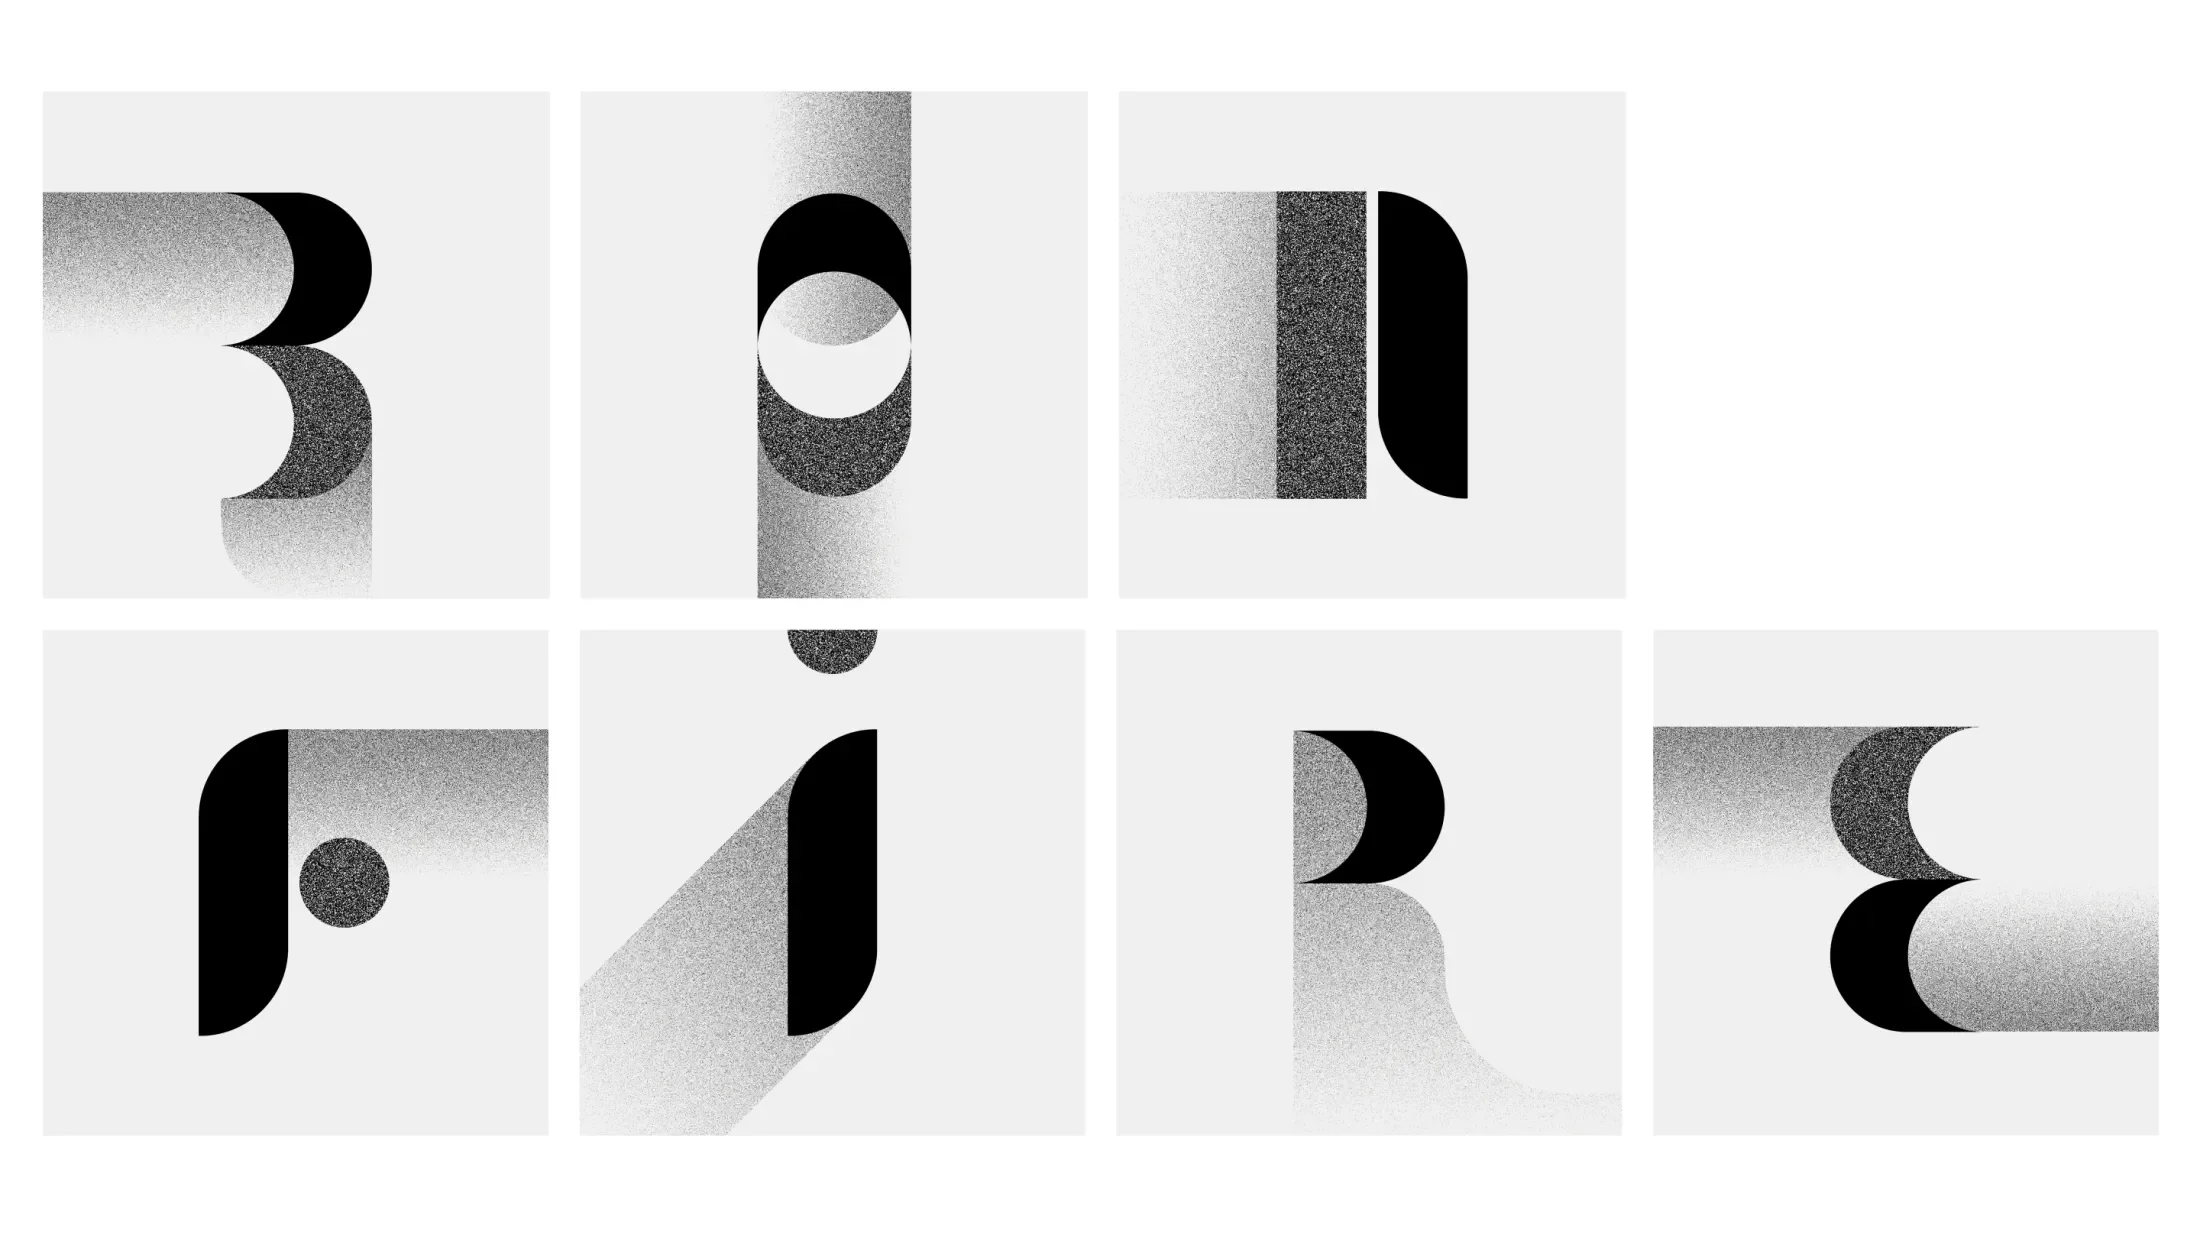 Simple shapes and gradients of grainy black and white that spell out each letter of "bonfire"